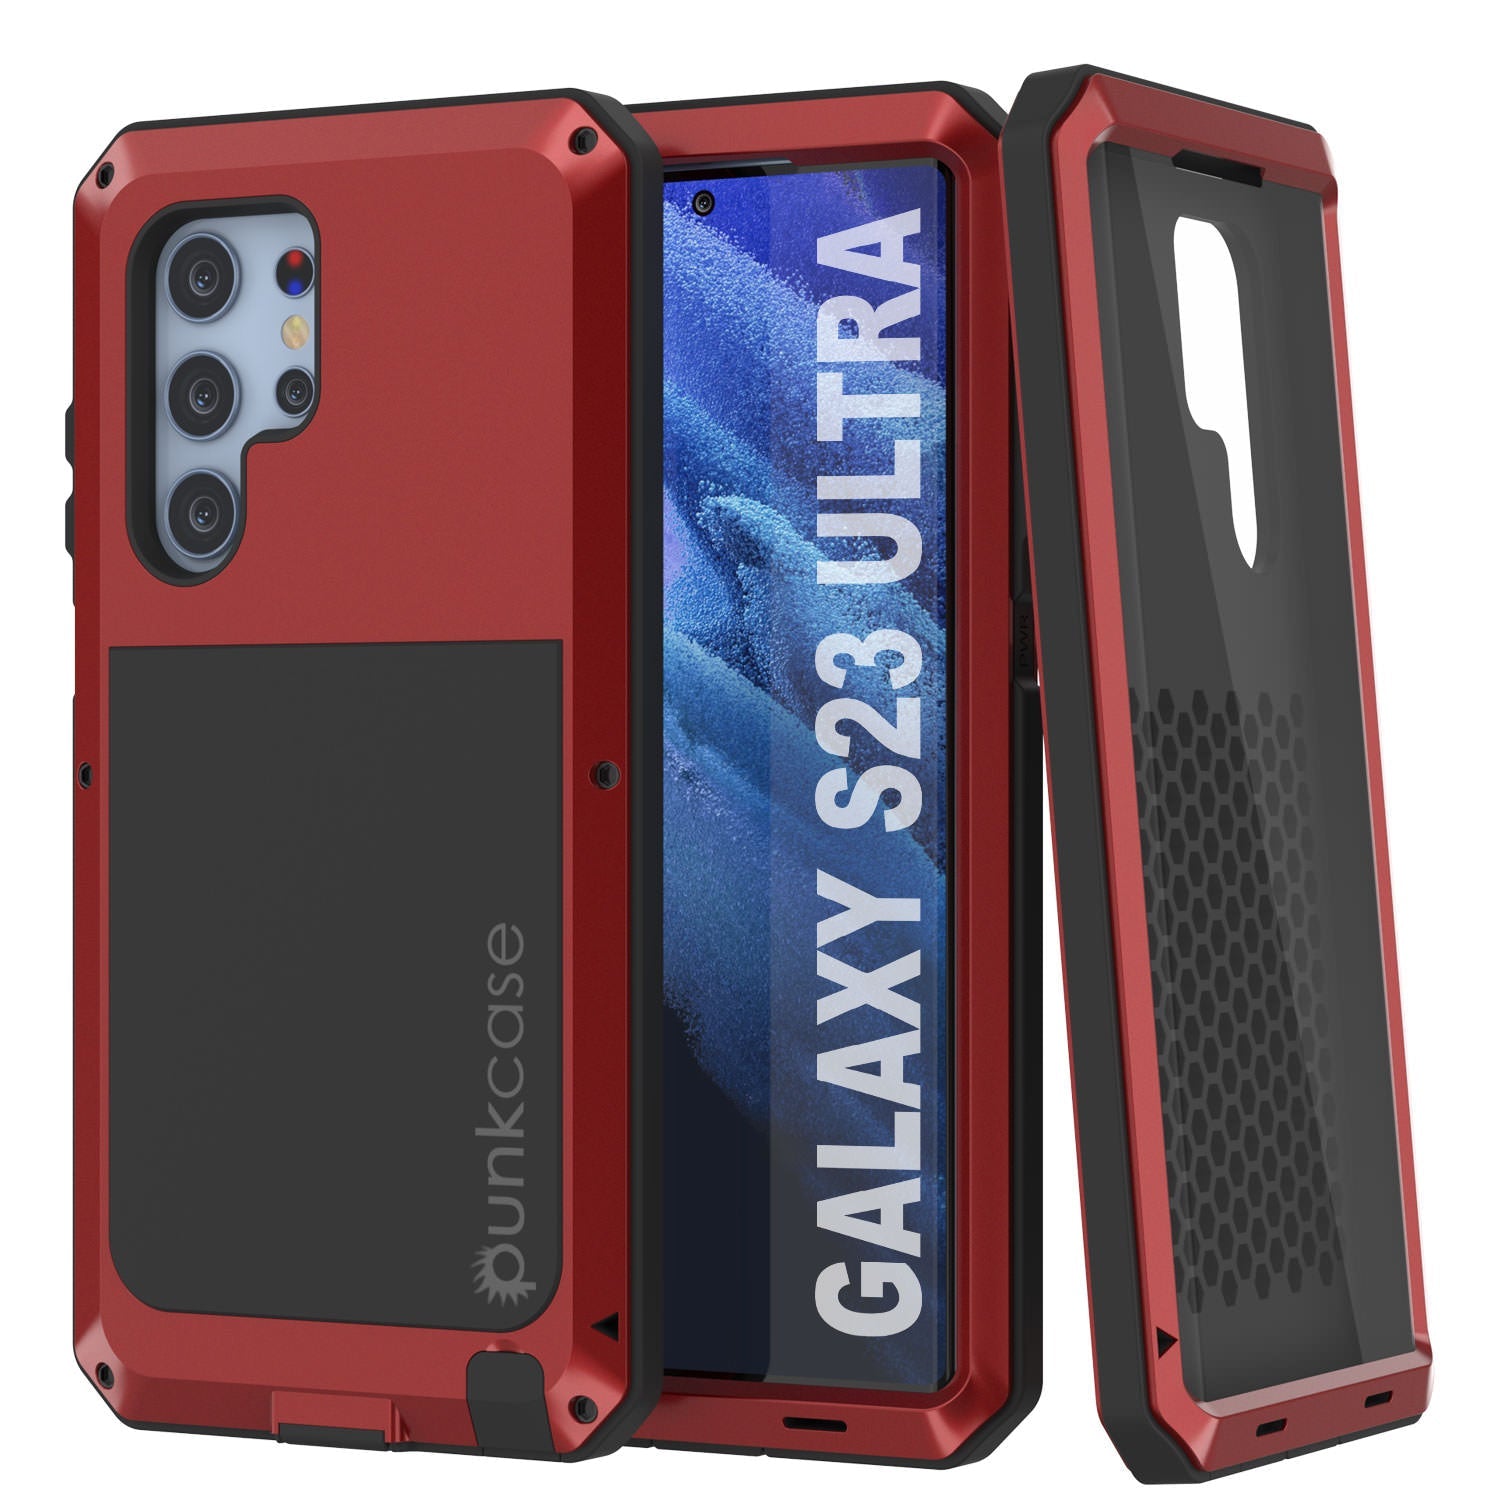 Galaxy S23 Ultra Metal Case, Heavy Duty Military Grade Armor Cover [shock proof] Full Body Hard [Red]